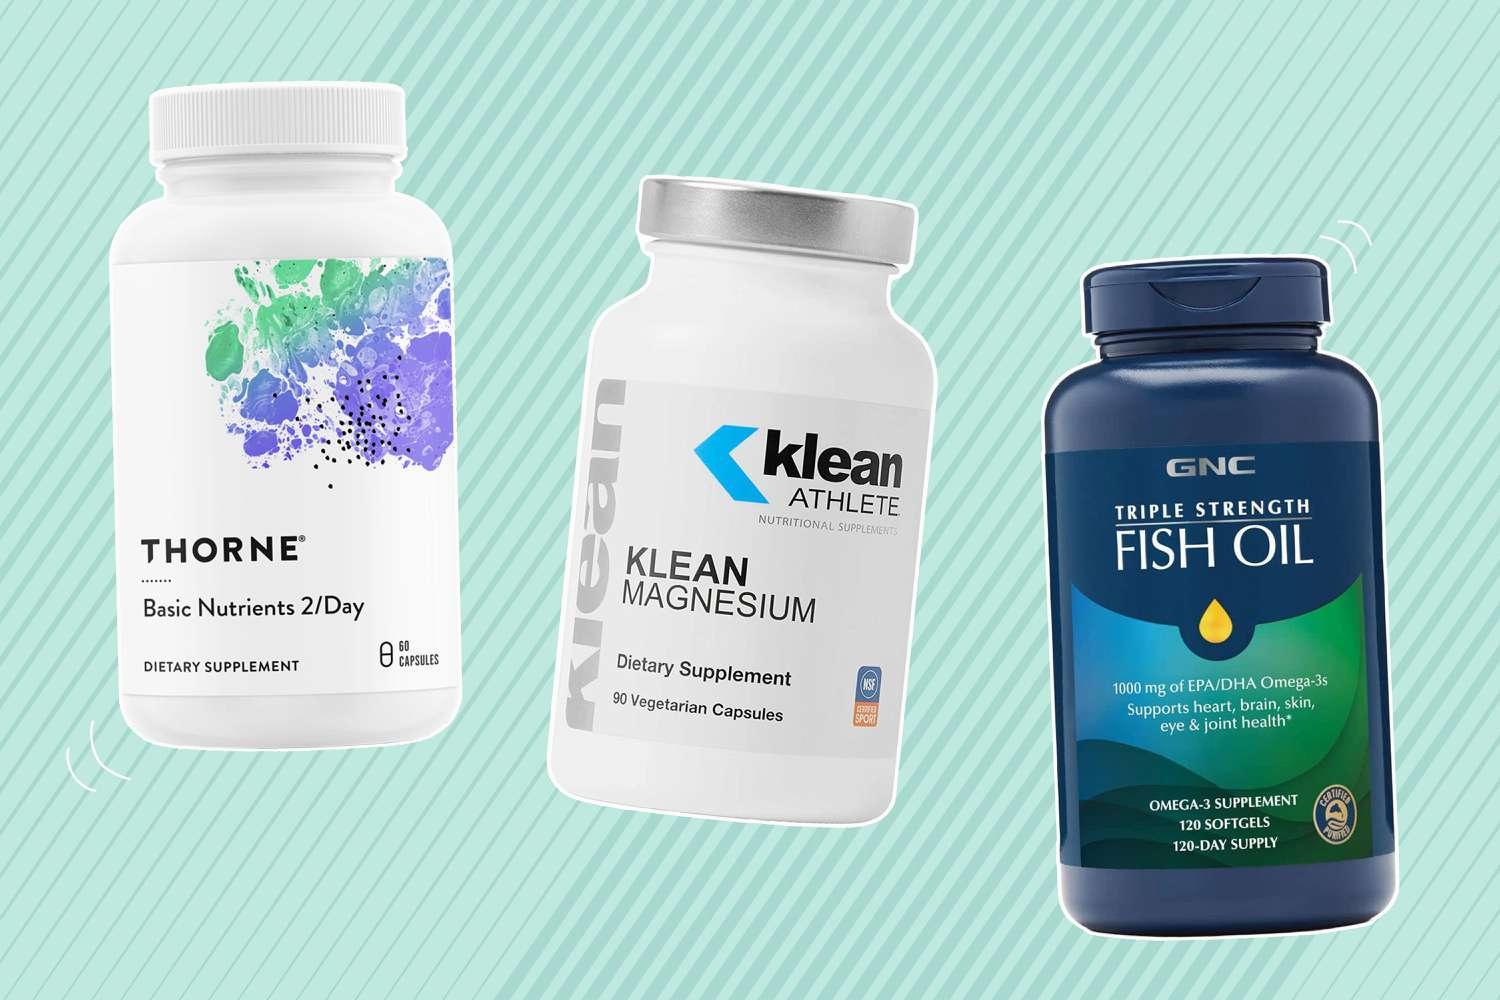 Three bottles of supplements, Thorne Basic Nutrients 2/Day, Klean Athlete Magnesium, and GNC Triple Strength Fish Oil.